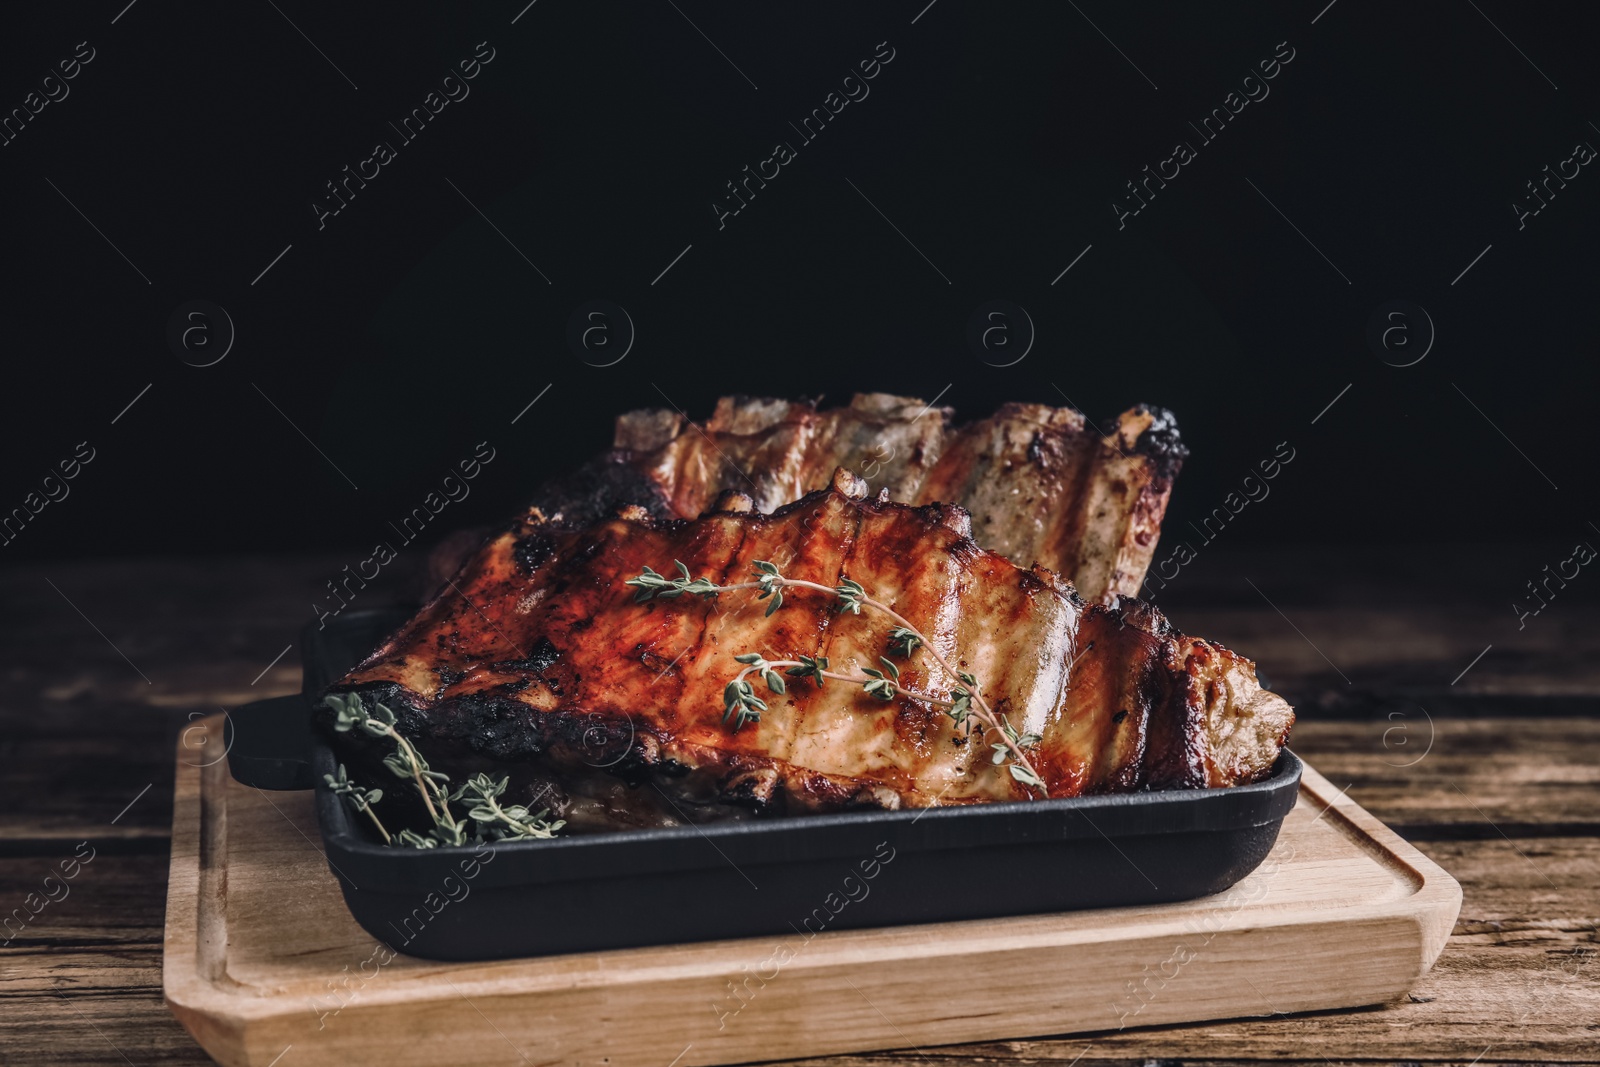 Image of Tasty grilled ribs with thyme on wooden table. Food photography  